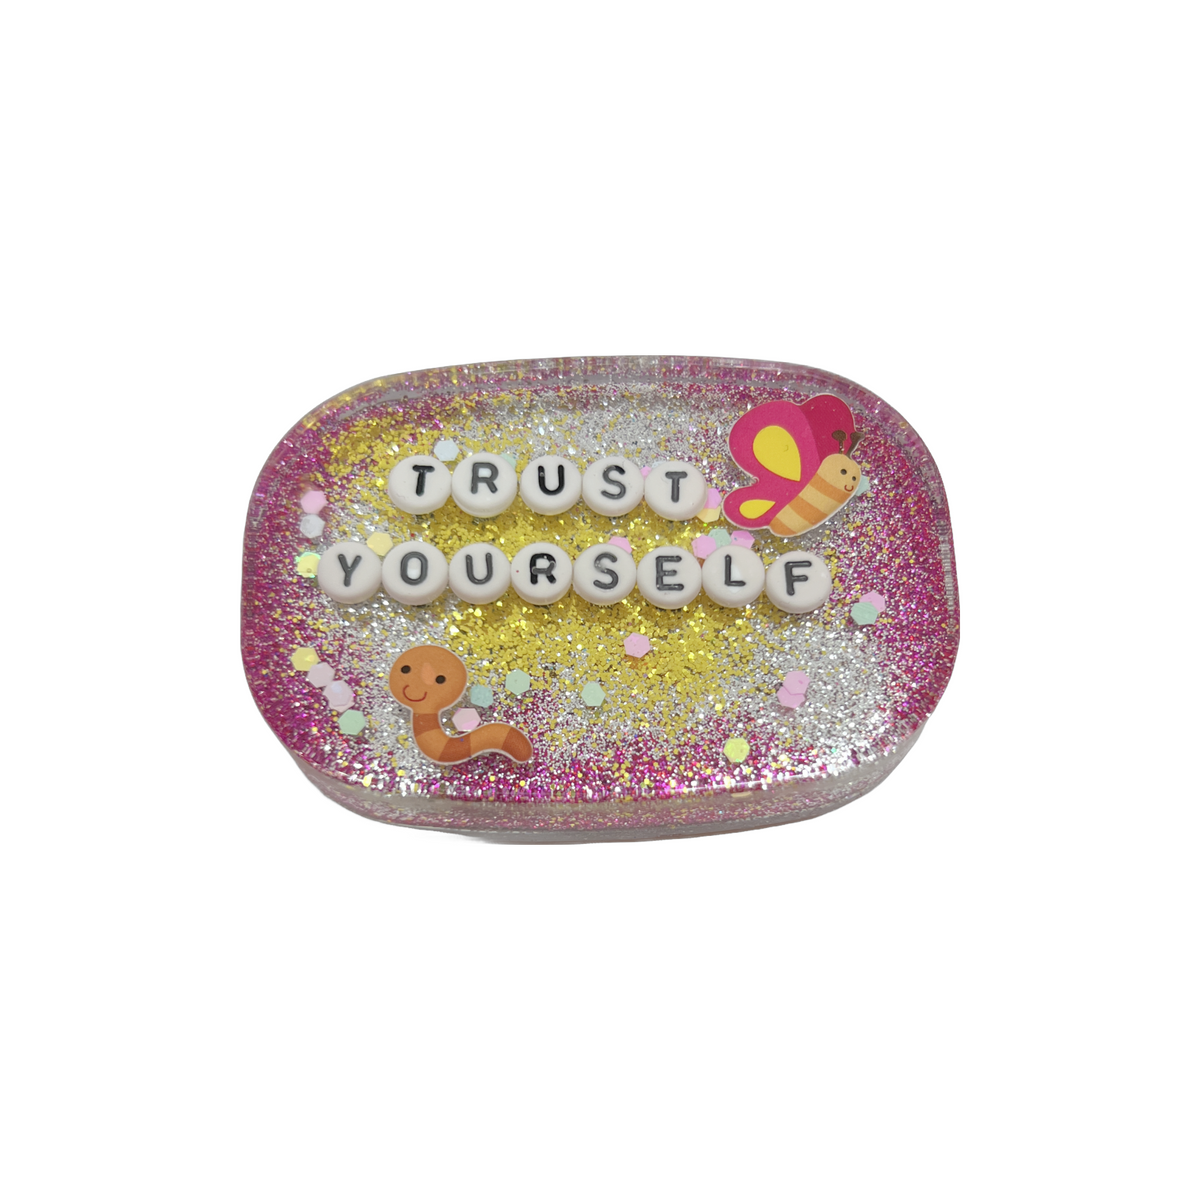 Trust Yourself - Shower Art - READY TO SHIP